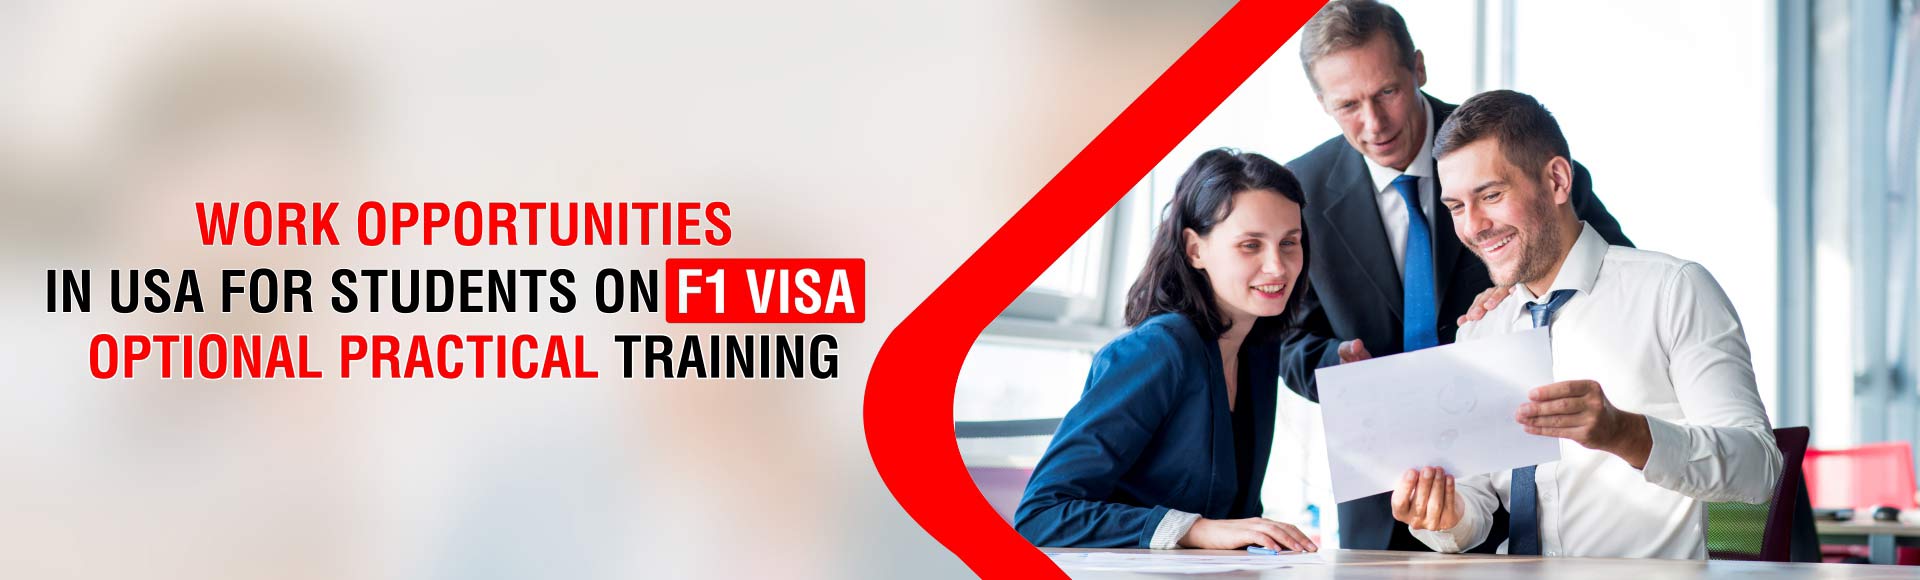 Work Opportunities in USA for Students on F1 visa : Optional practical training